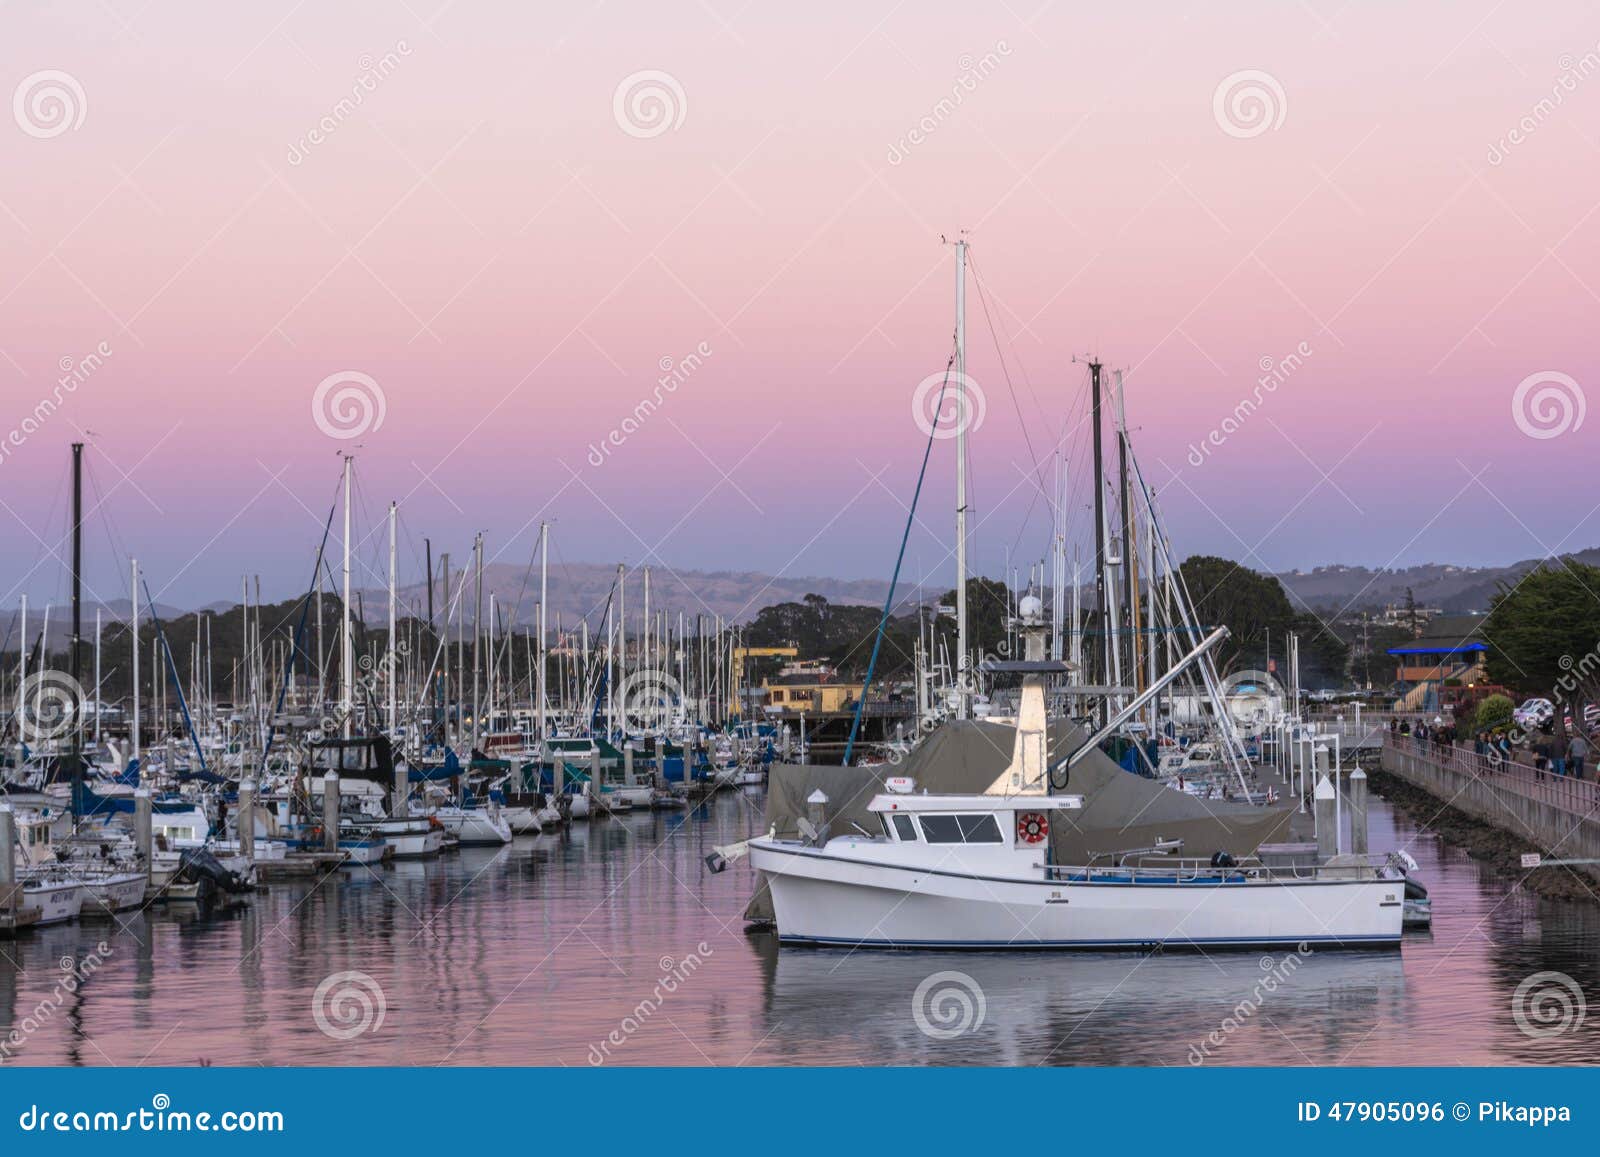 Boats in the Harbor in Monterey Editorial Photo - Image of sidewalk ...